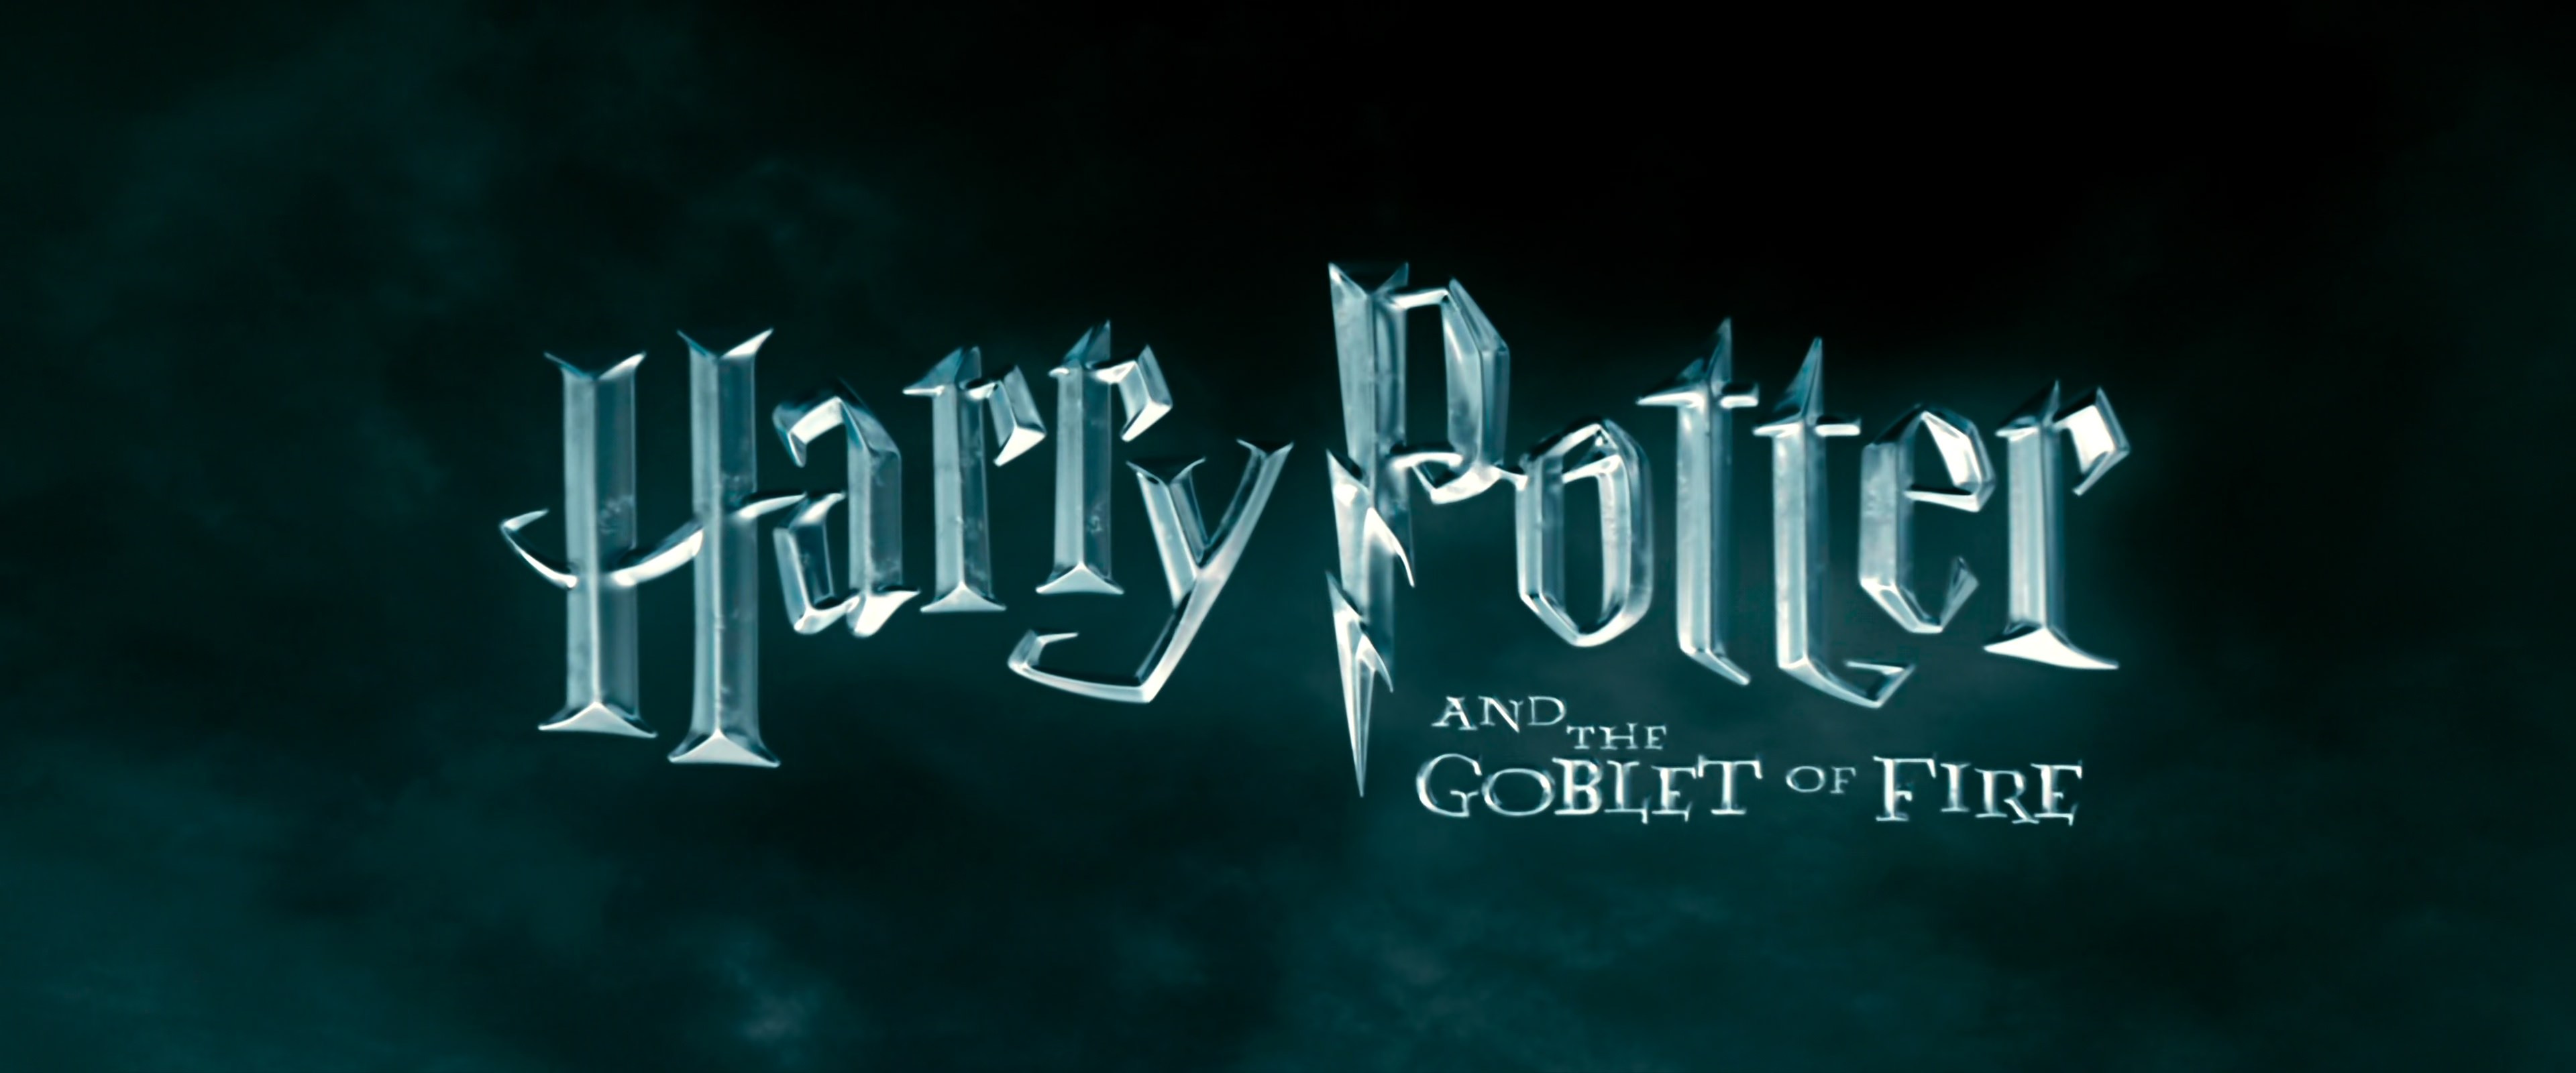 download Harry Potter and the Goblet of Fire